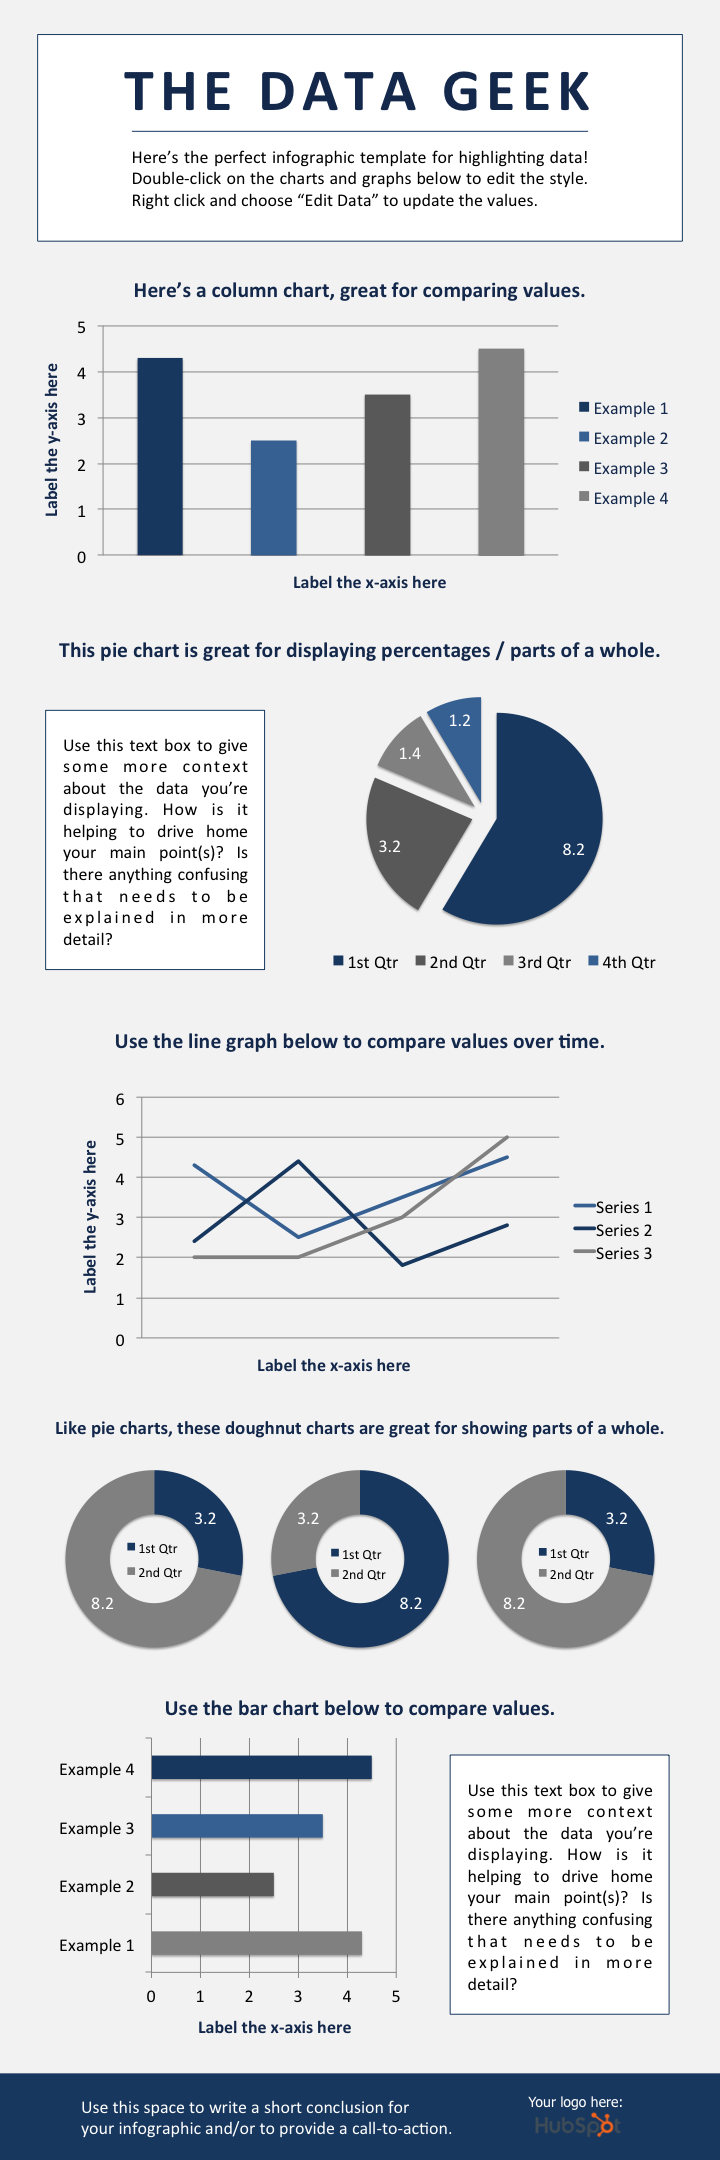 Infographic Template - The Data Geek